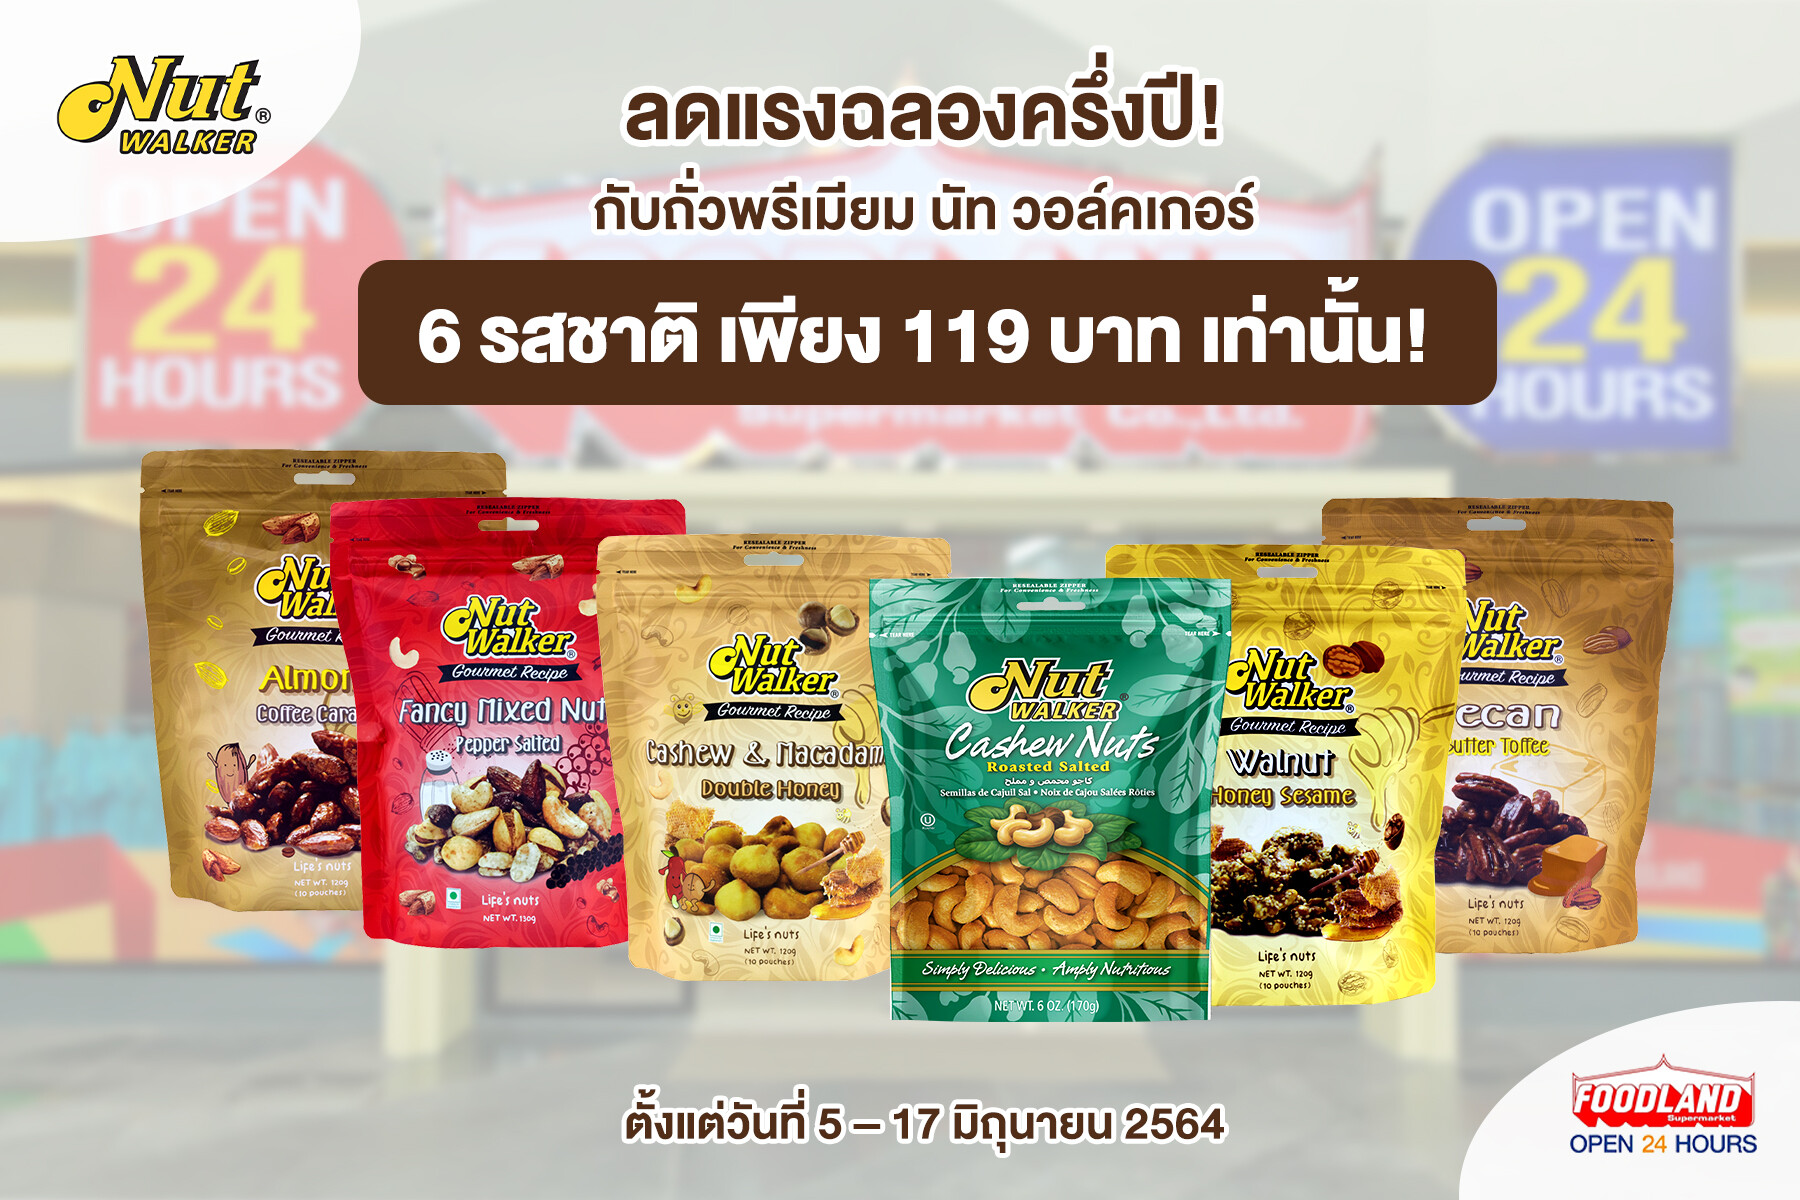 Mid-Year Super Sale with Nut Walker 6 flavors only at THB119